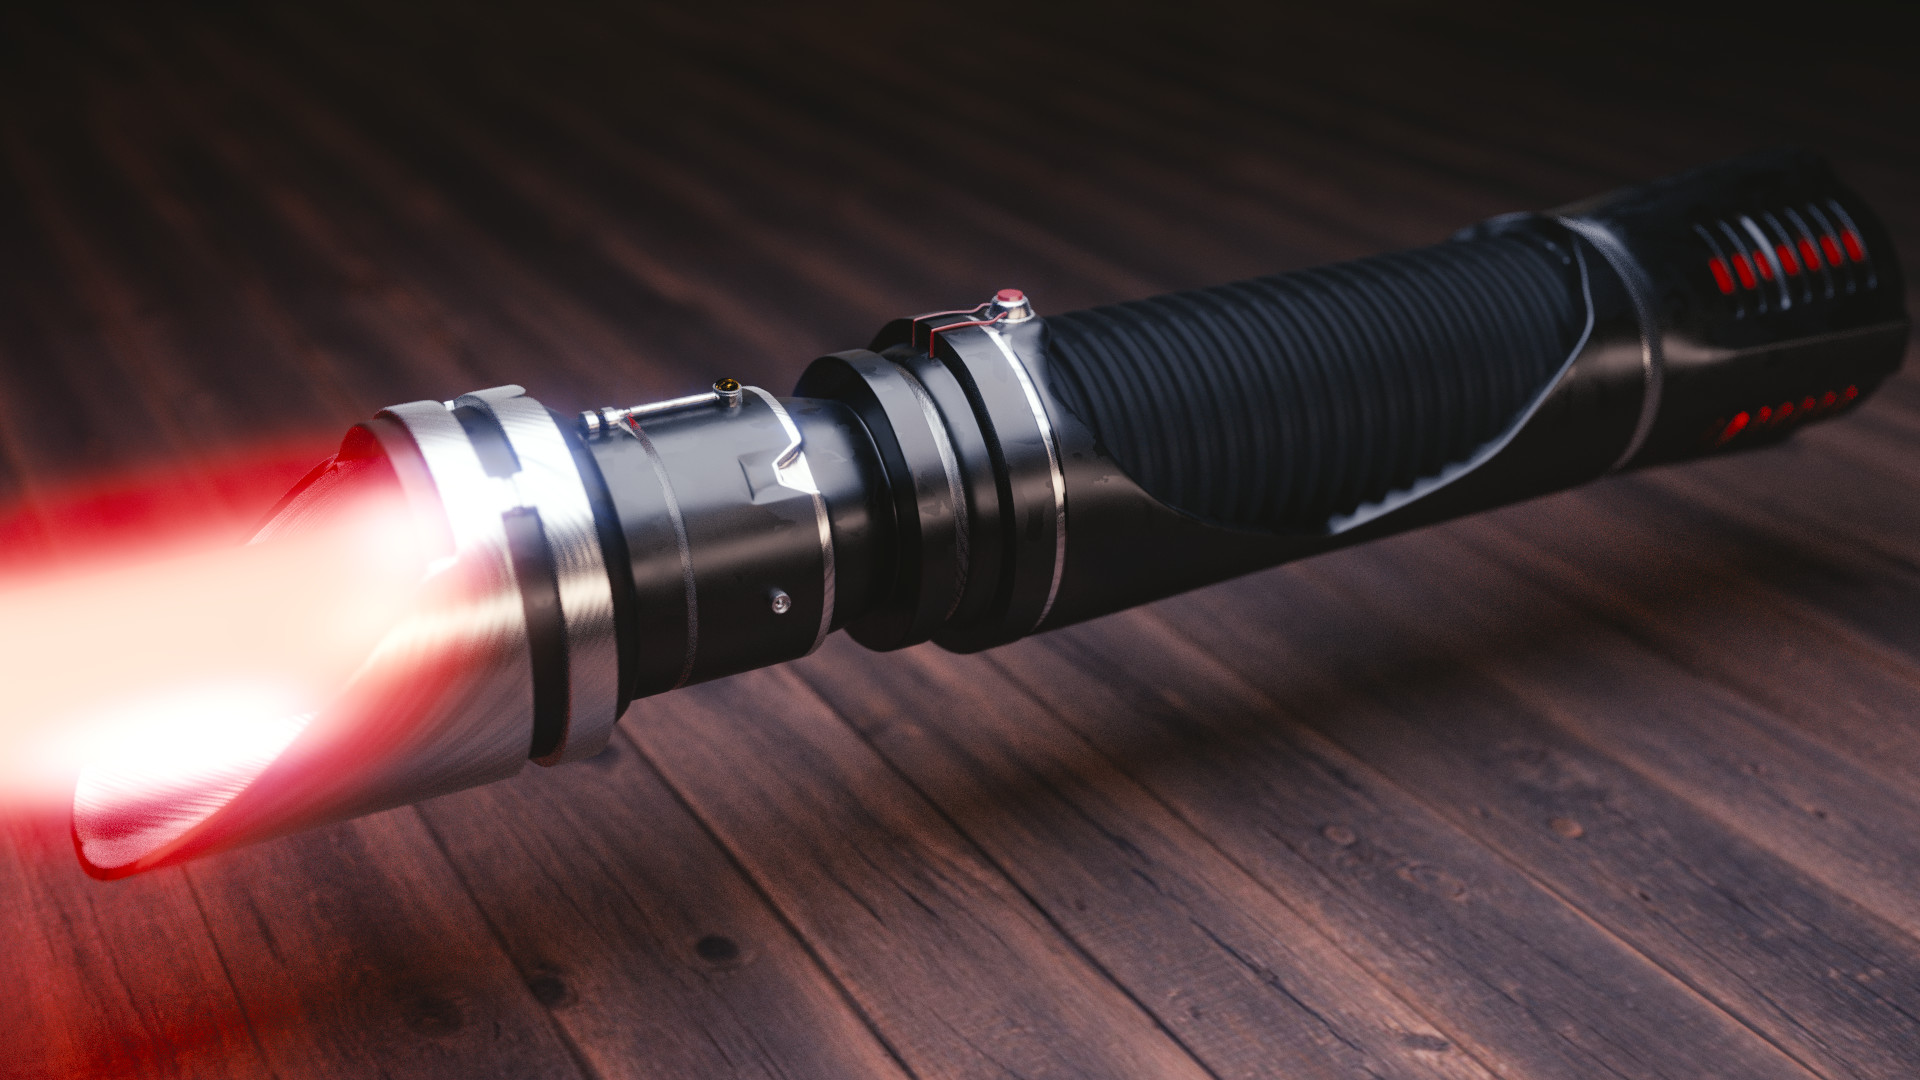 1920x1080 Made a lightsaber wallpaper, let me know how you folks like it.